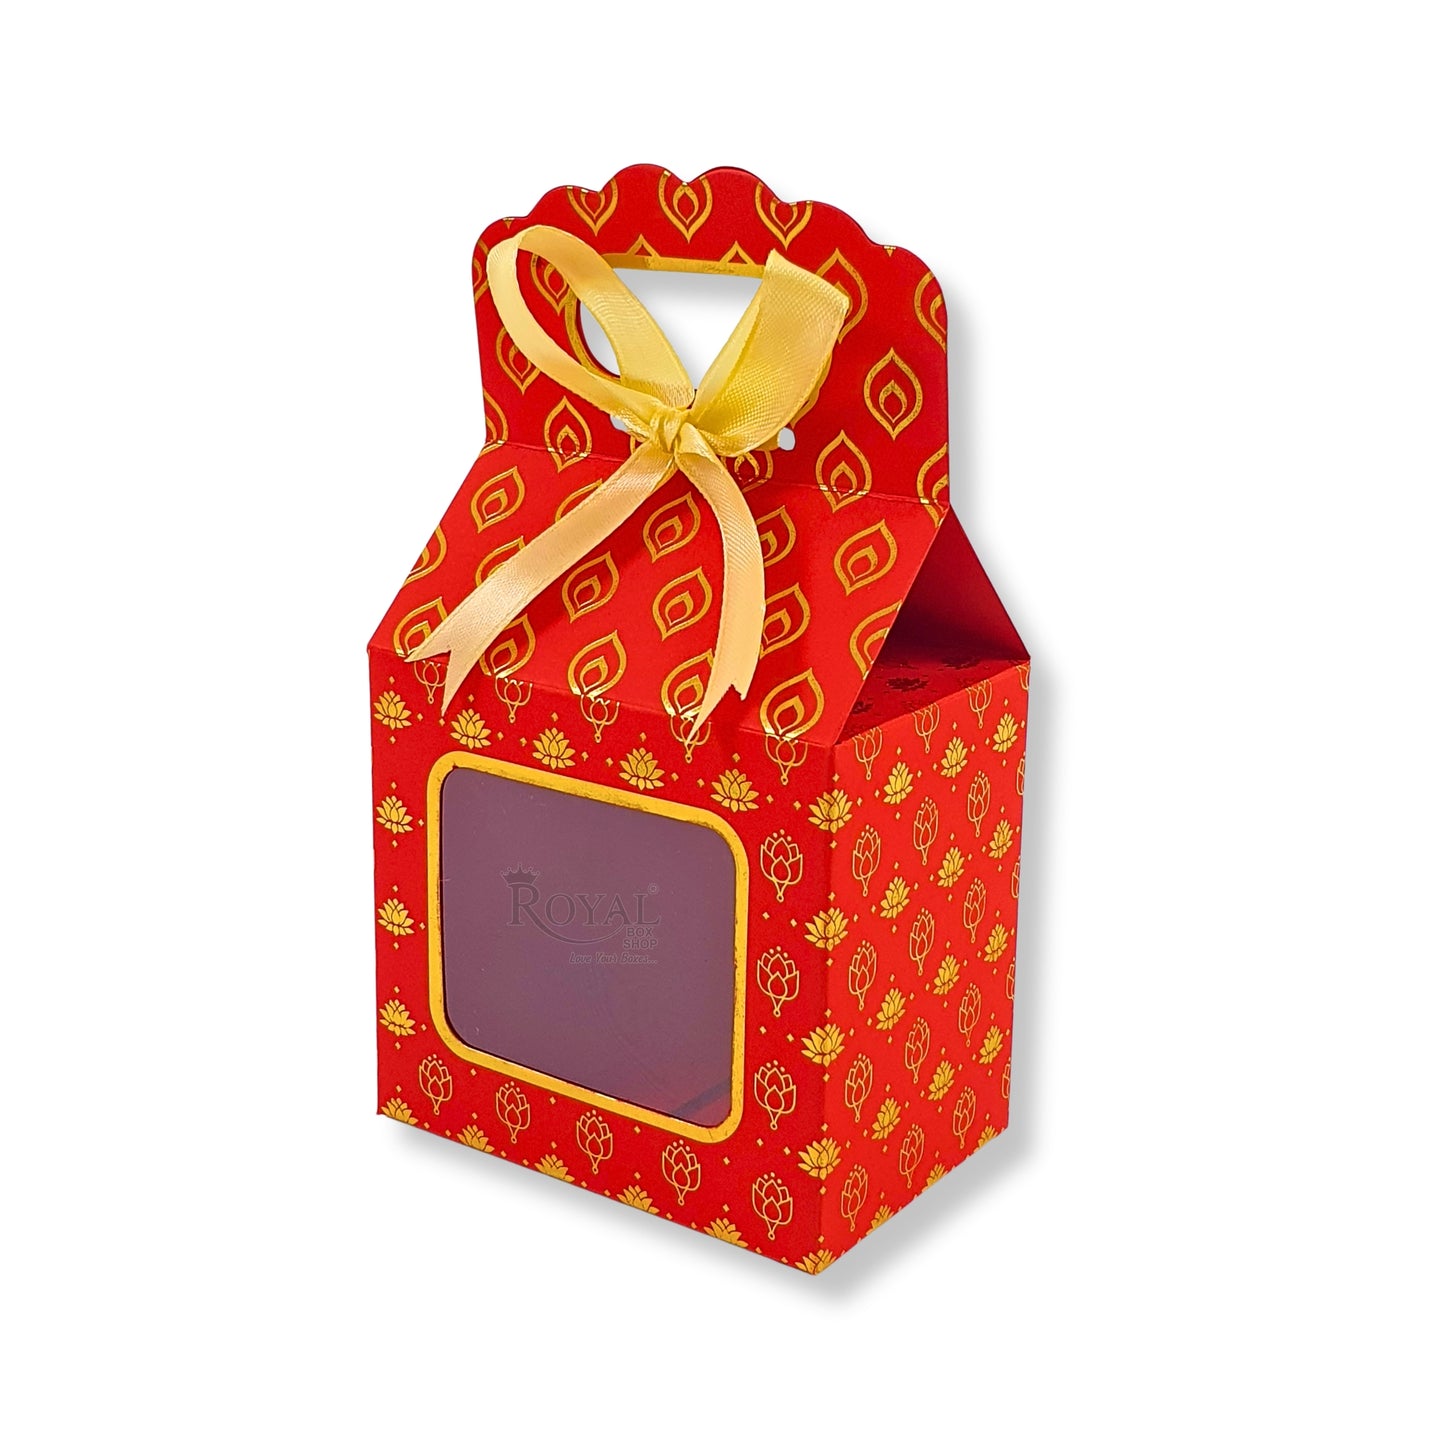 Premium Gift Box with Window I Red Flower Leaf Print I 4x2.5x3.5 inches I For Return Favor Gift, Baby Shower Gifts, Room Hampers, Candy Box, Birthday Return Gift